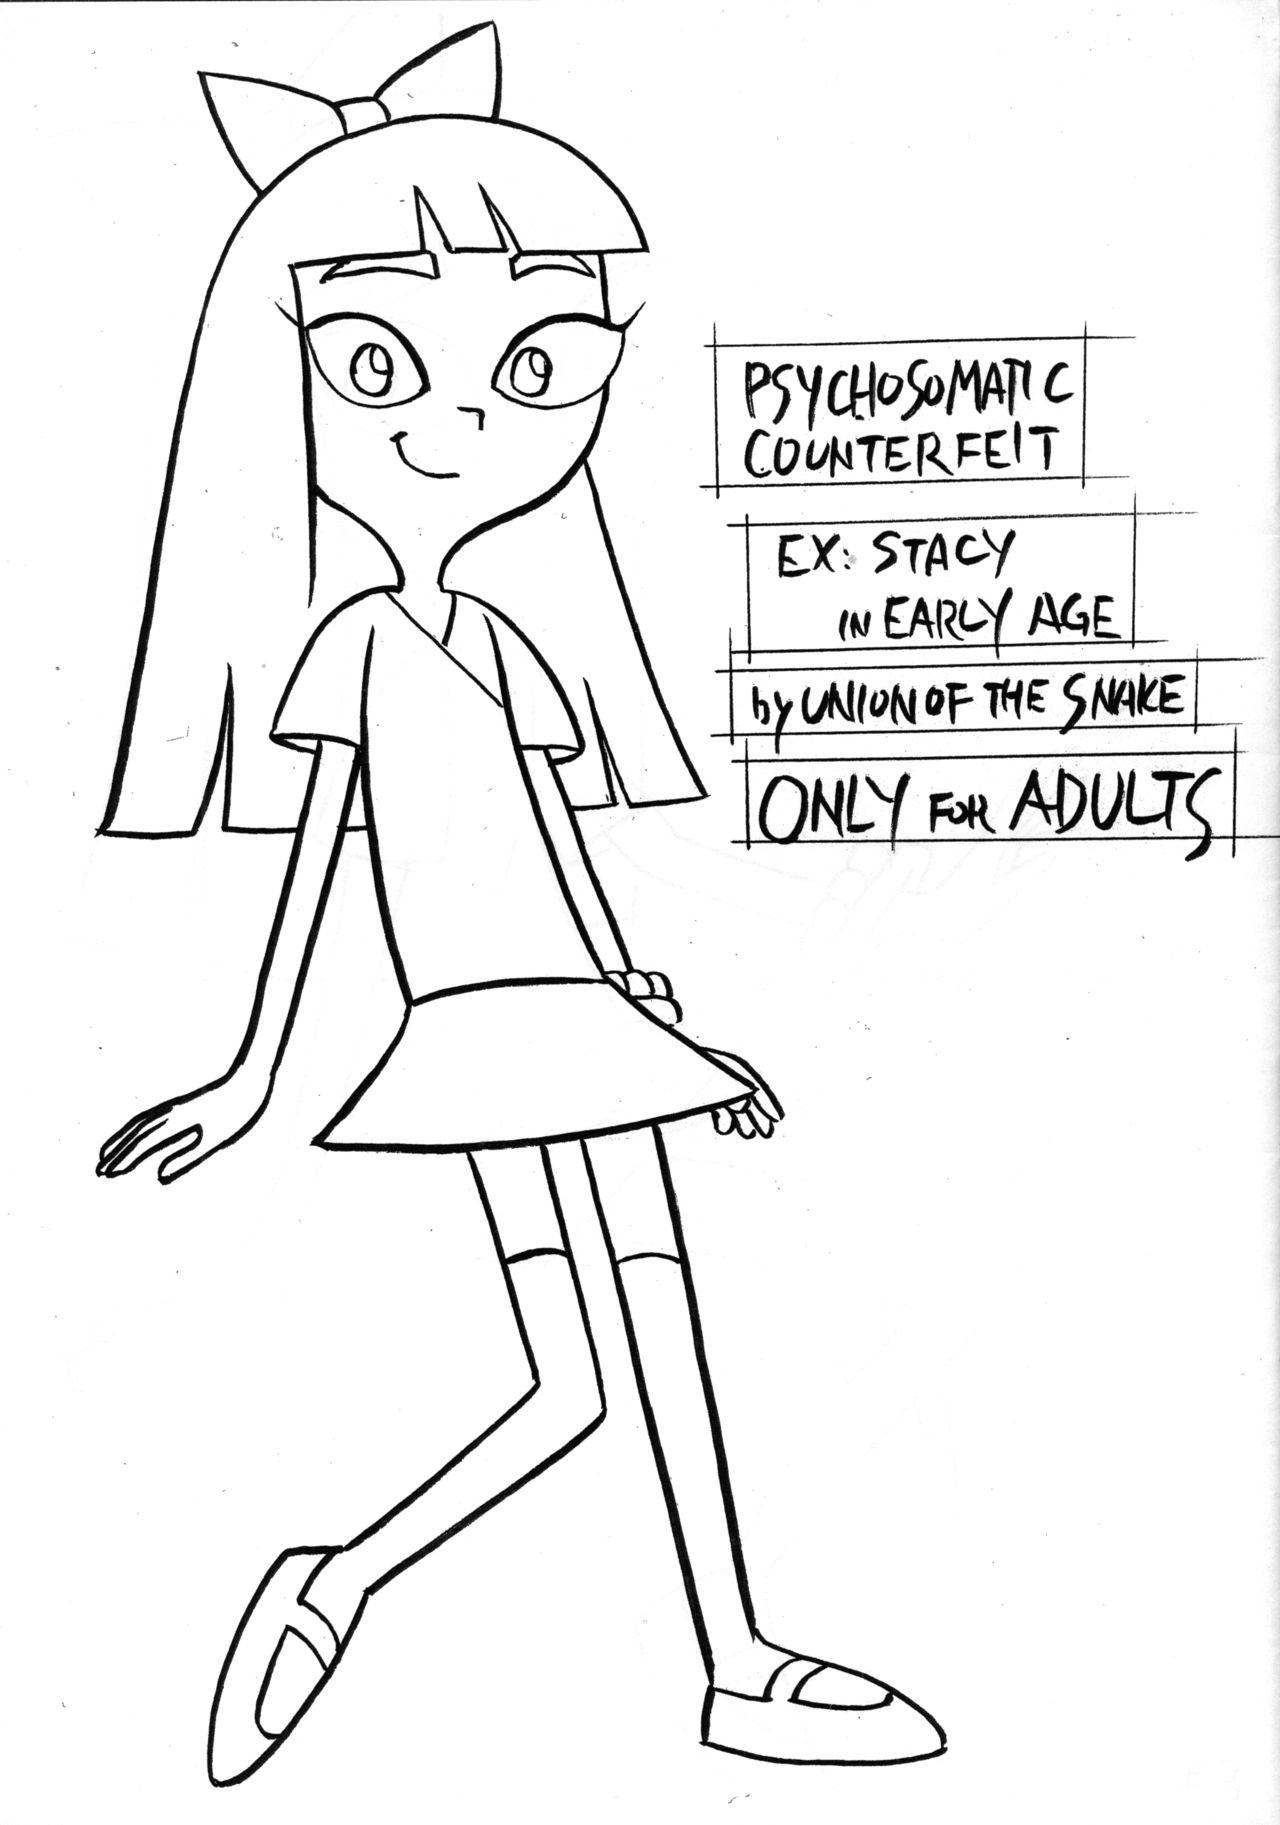 Psychosomatic Counterfeit Ex: Stacy in Early Age 0